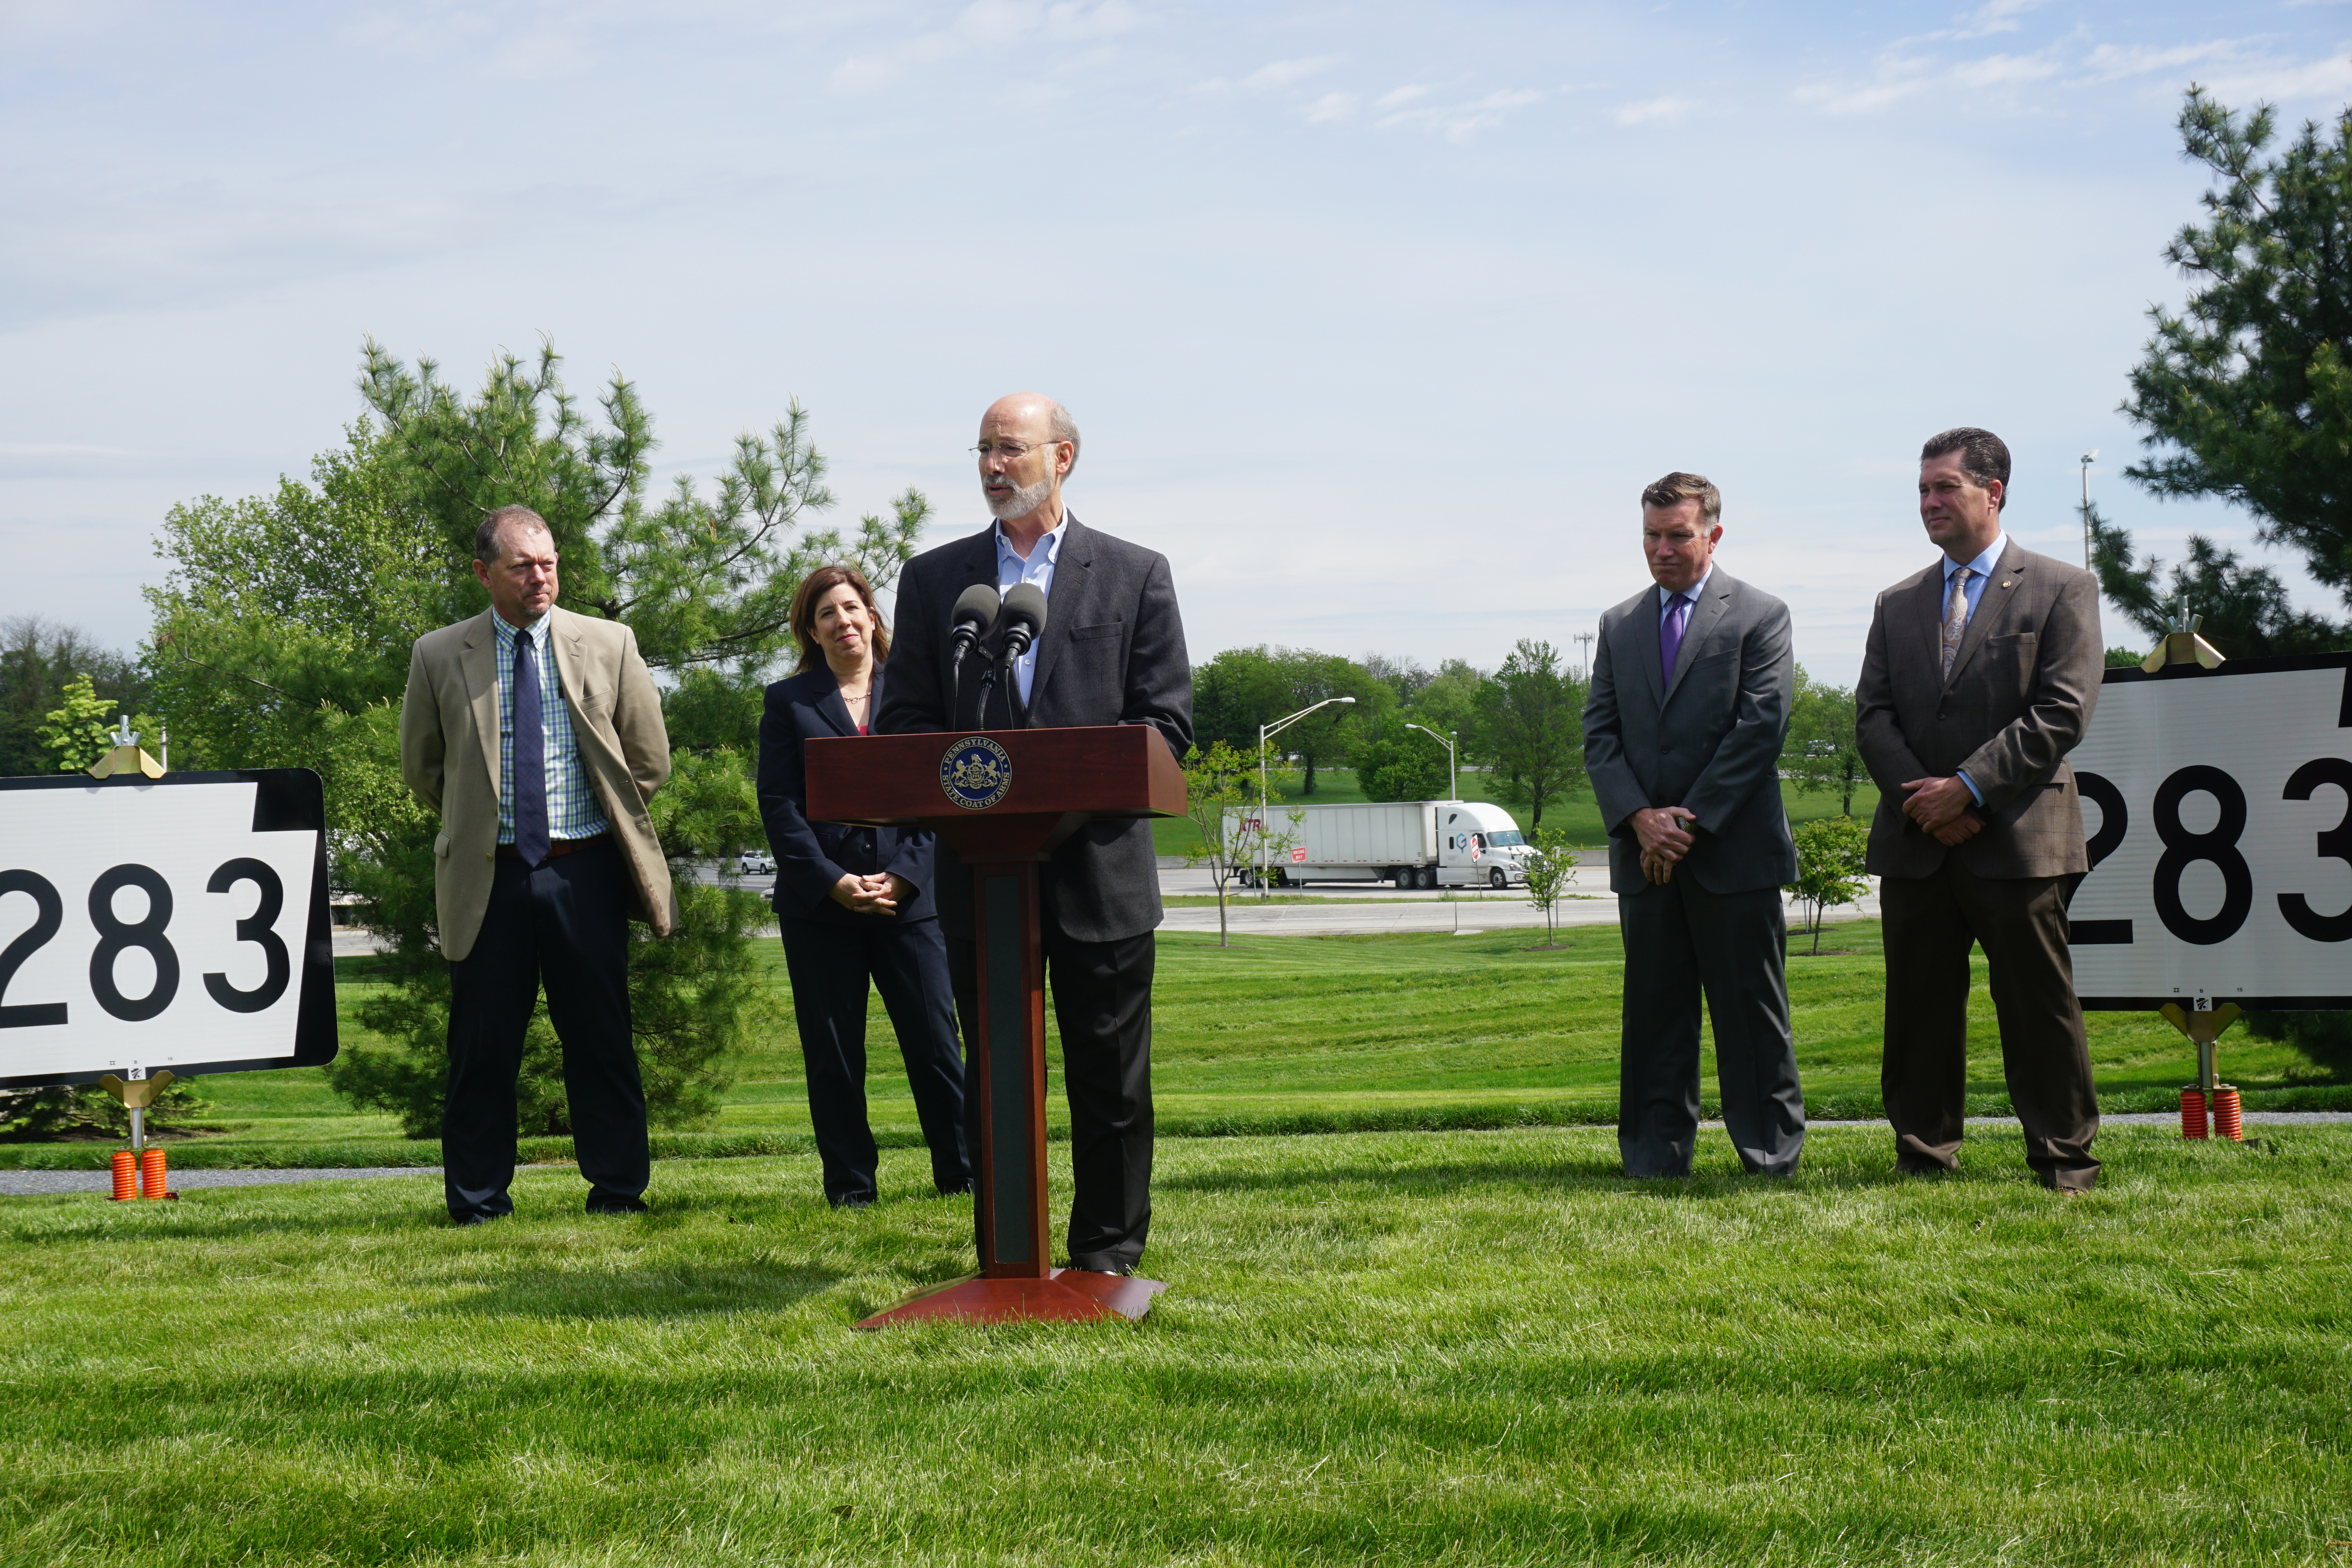 From left, District 8 Executive Mike Keiser, PennDOT Secretary Leslie S. Richards, Governor Tom Wolf, Pennsylvania Turnpike CEO Mark Compton and state Rep. Tom Mehaffie   kick off the Route 283 project outside the Pennsylvania Turnpike headquarters in Dauphin County.